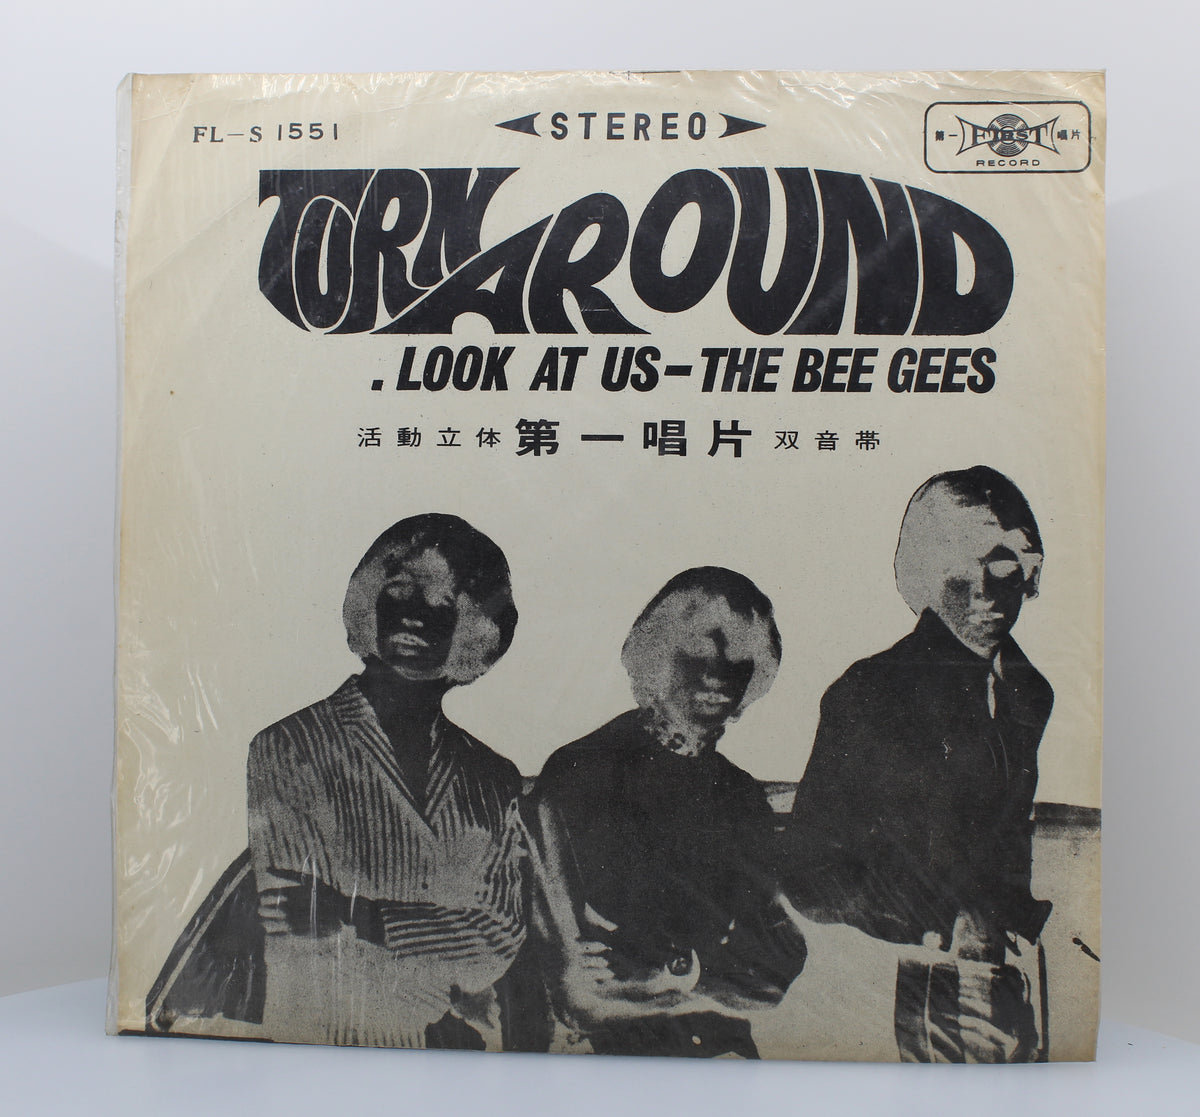 The Bee Gees – Turn Around, Look At Us, Vinyl, LP, Compilation, Unofficial Release, Taiwan 1967